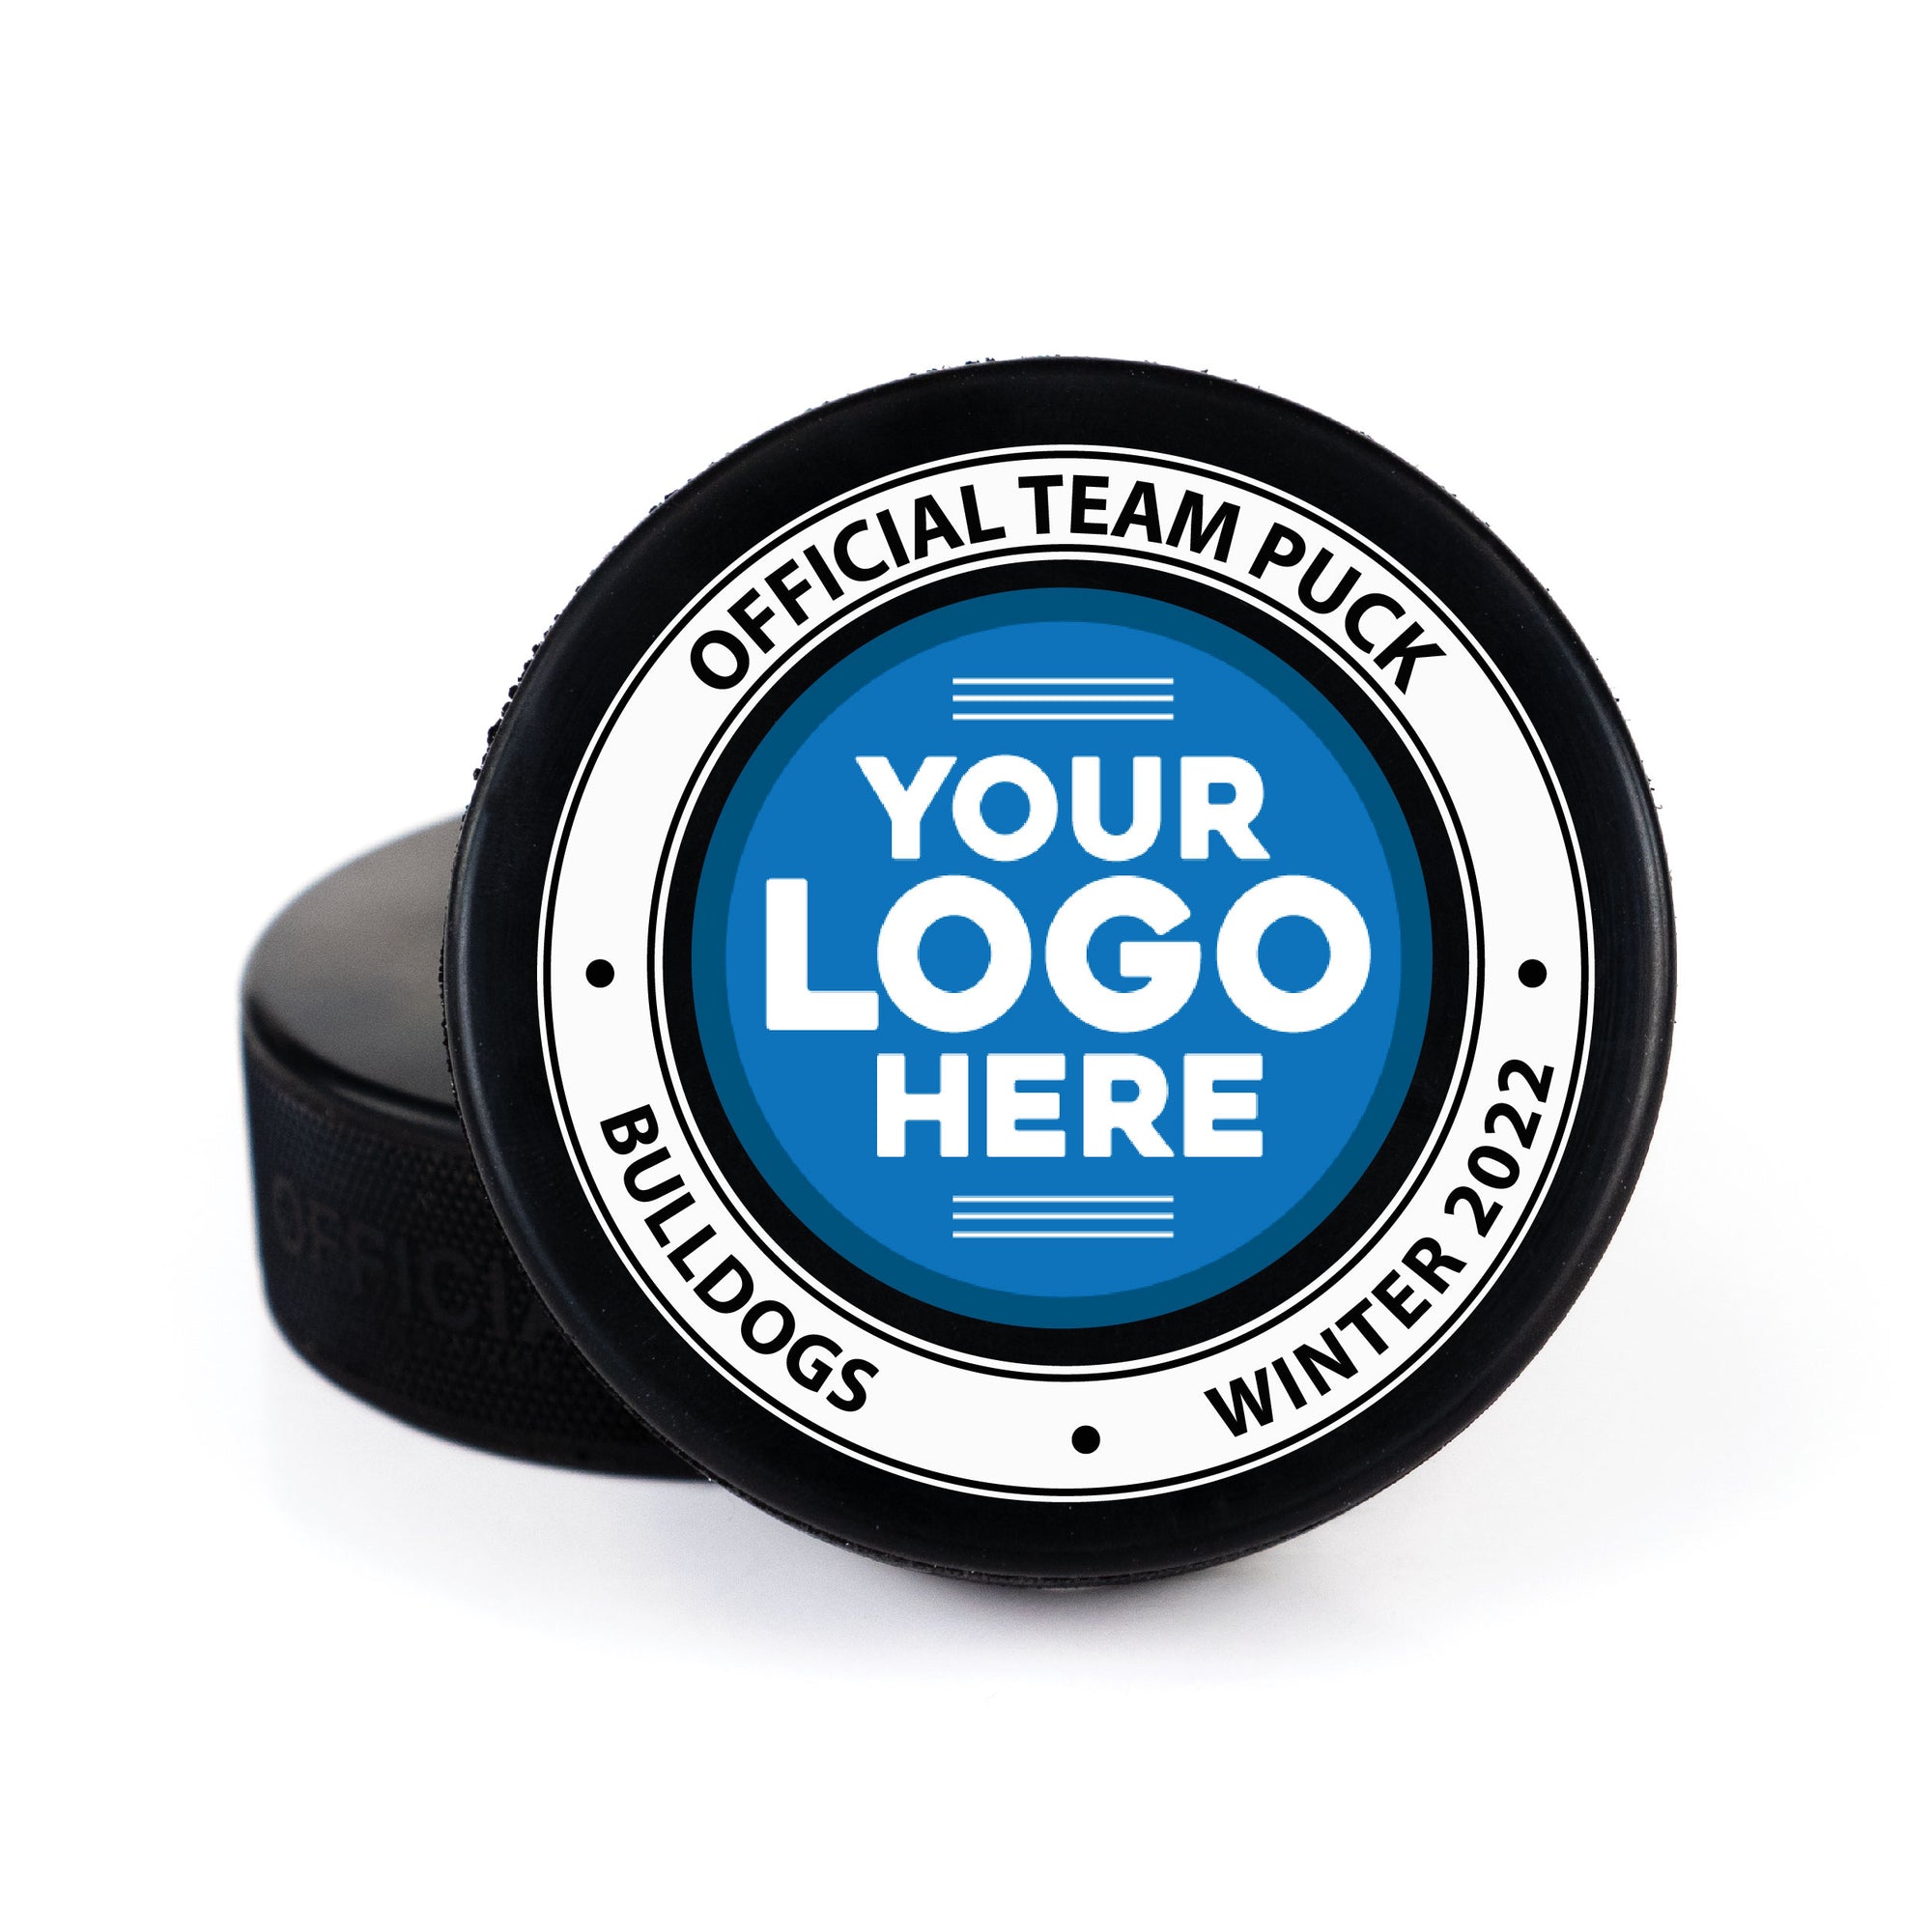 Printed Hockey Puck with Official Team Puck Logo Design